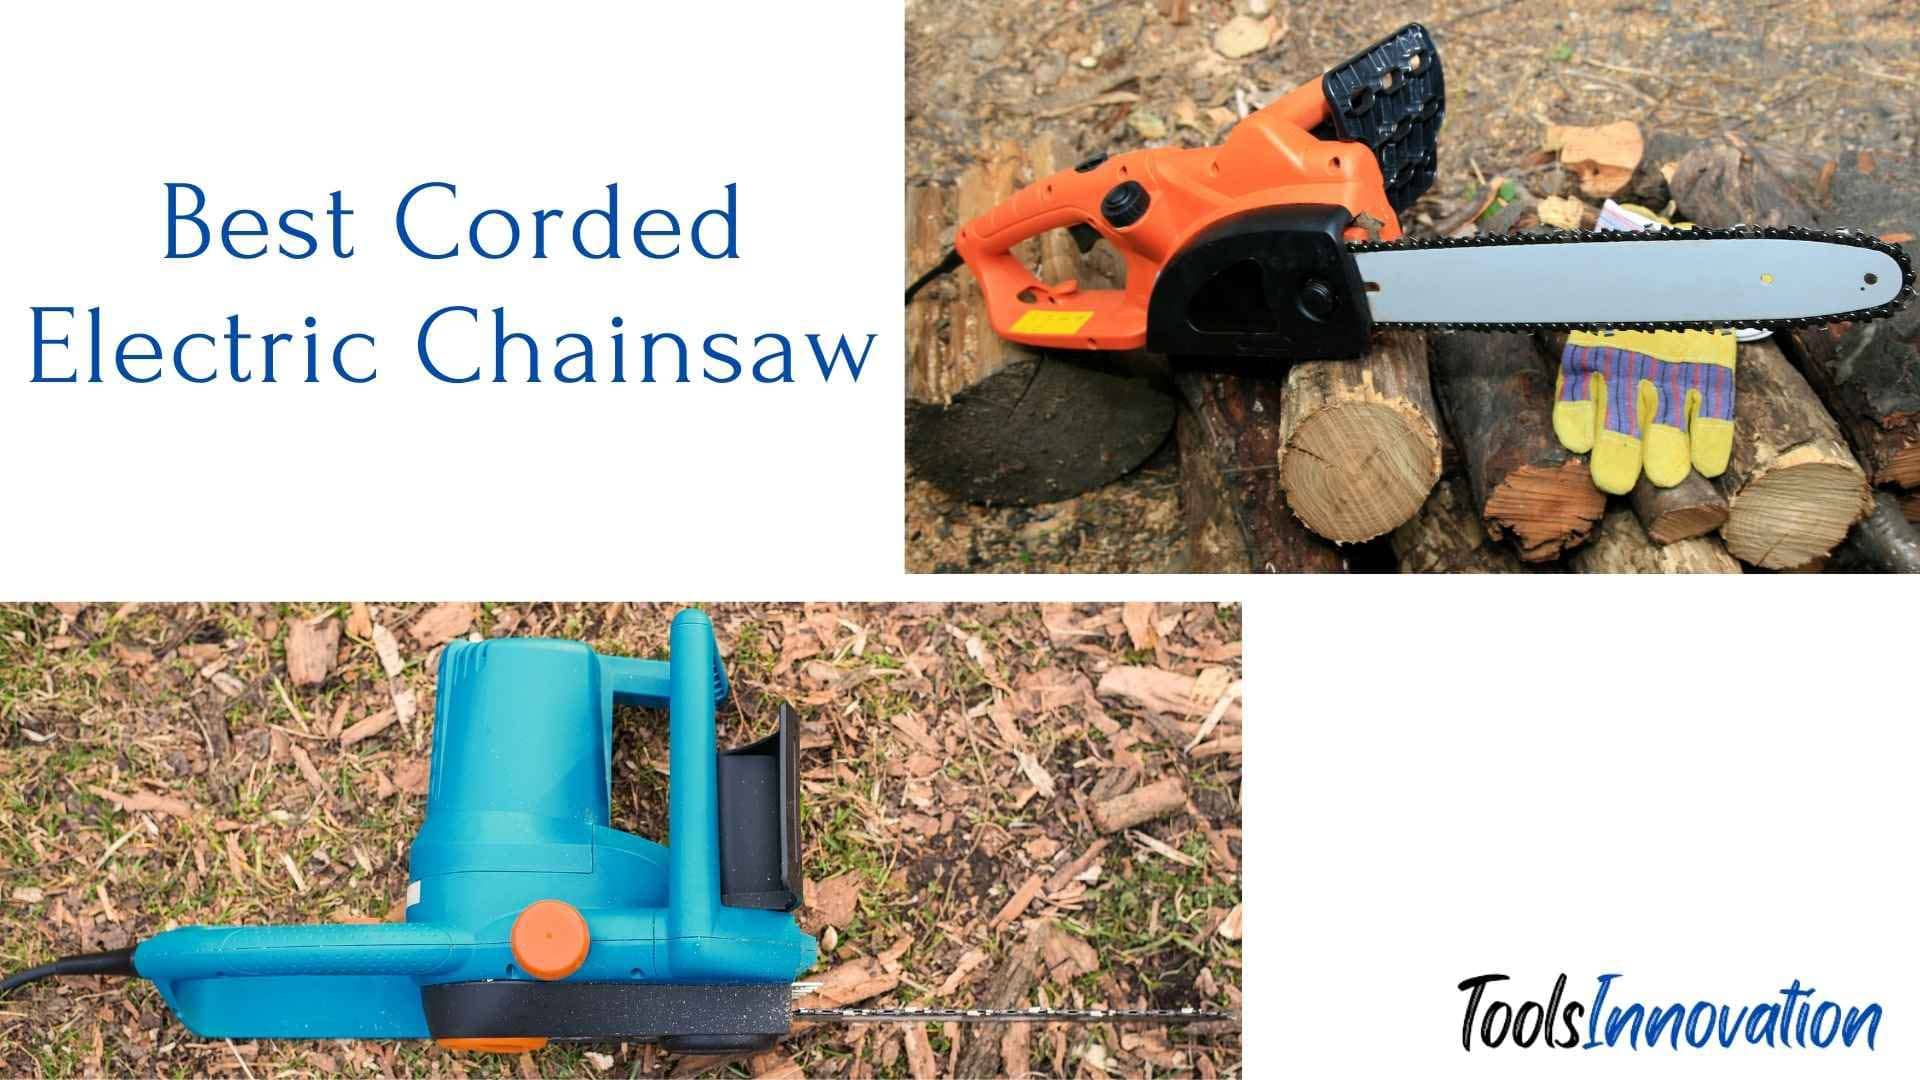 Best Corded Electric Chainsaw